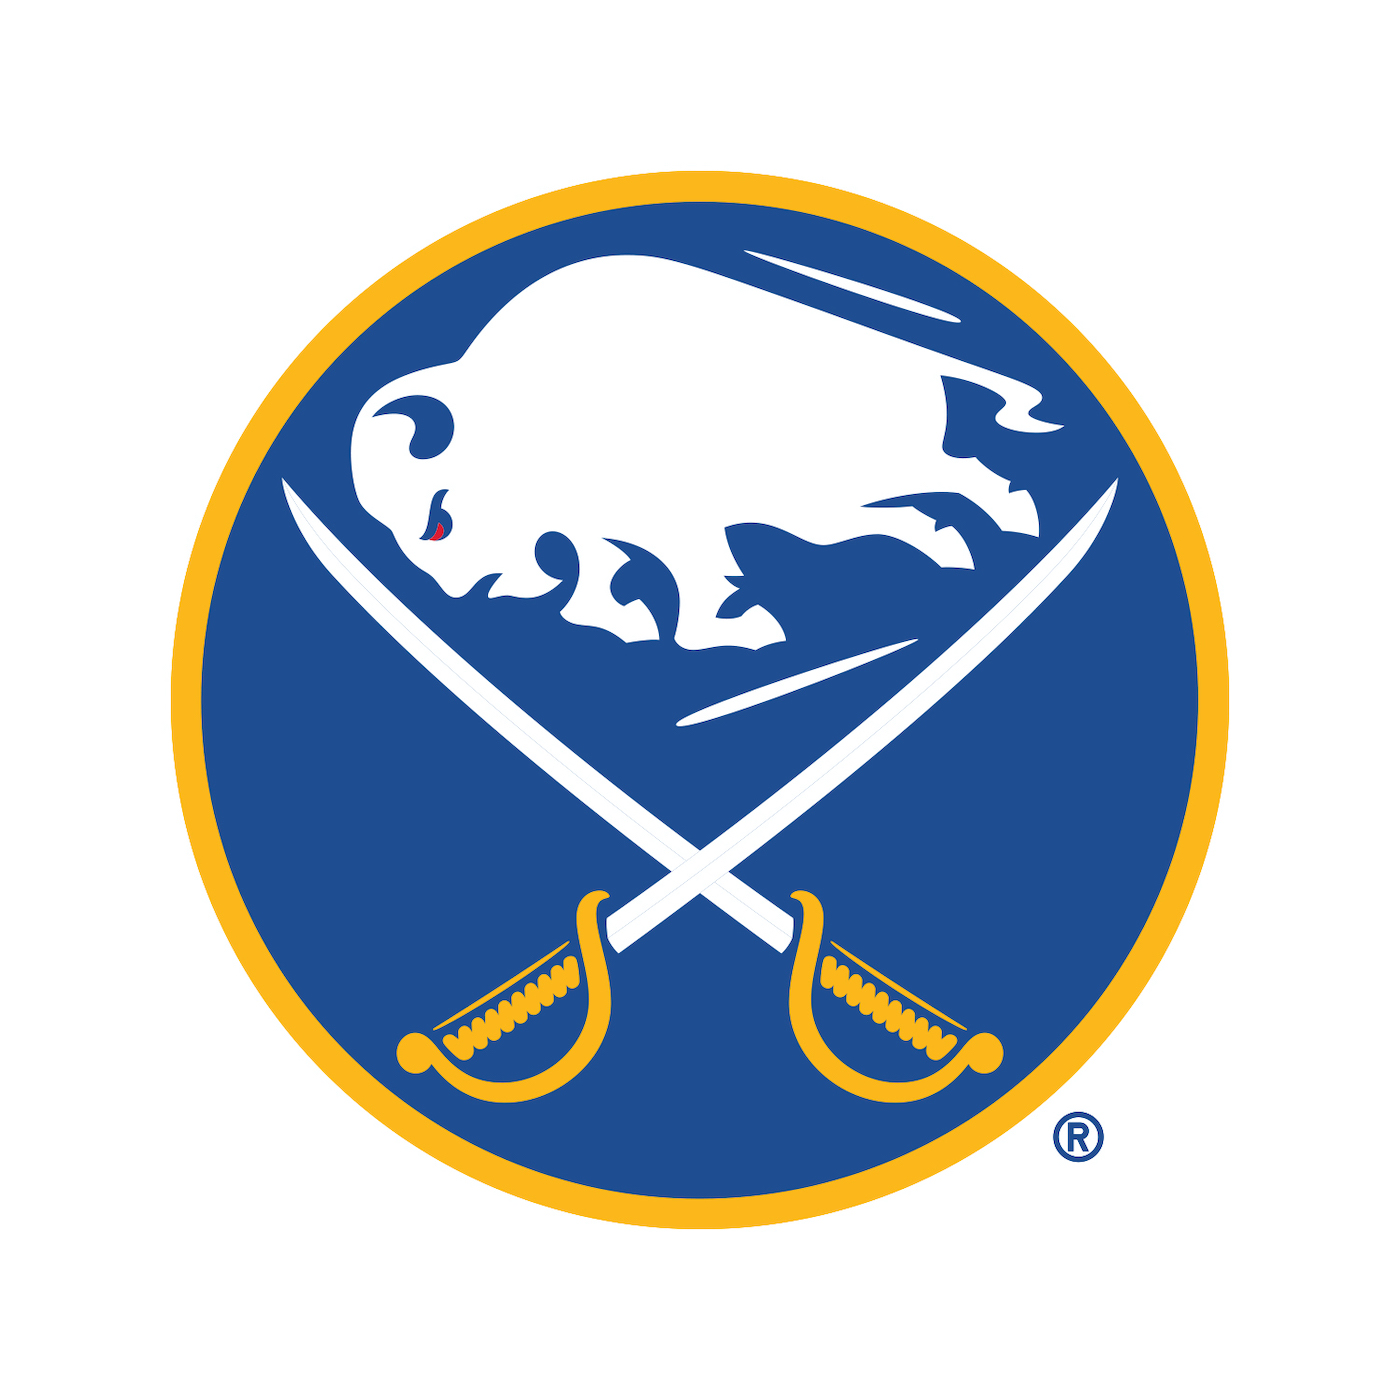 The Buffalo Sabres logo shield is a registered trademark. (Image courtesy of the Buffalo Sabres/Pegula Sports and Entertainment)